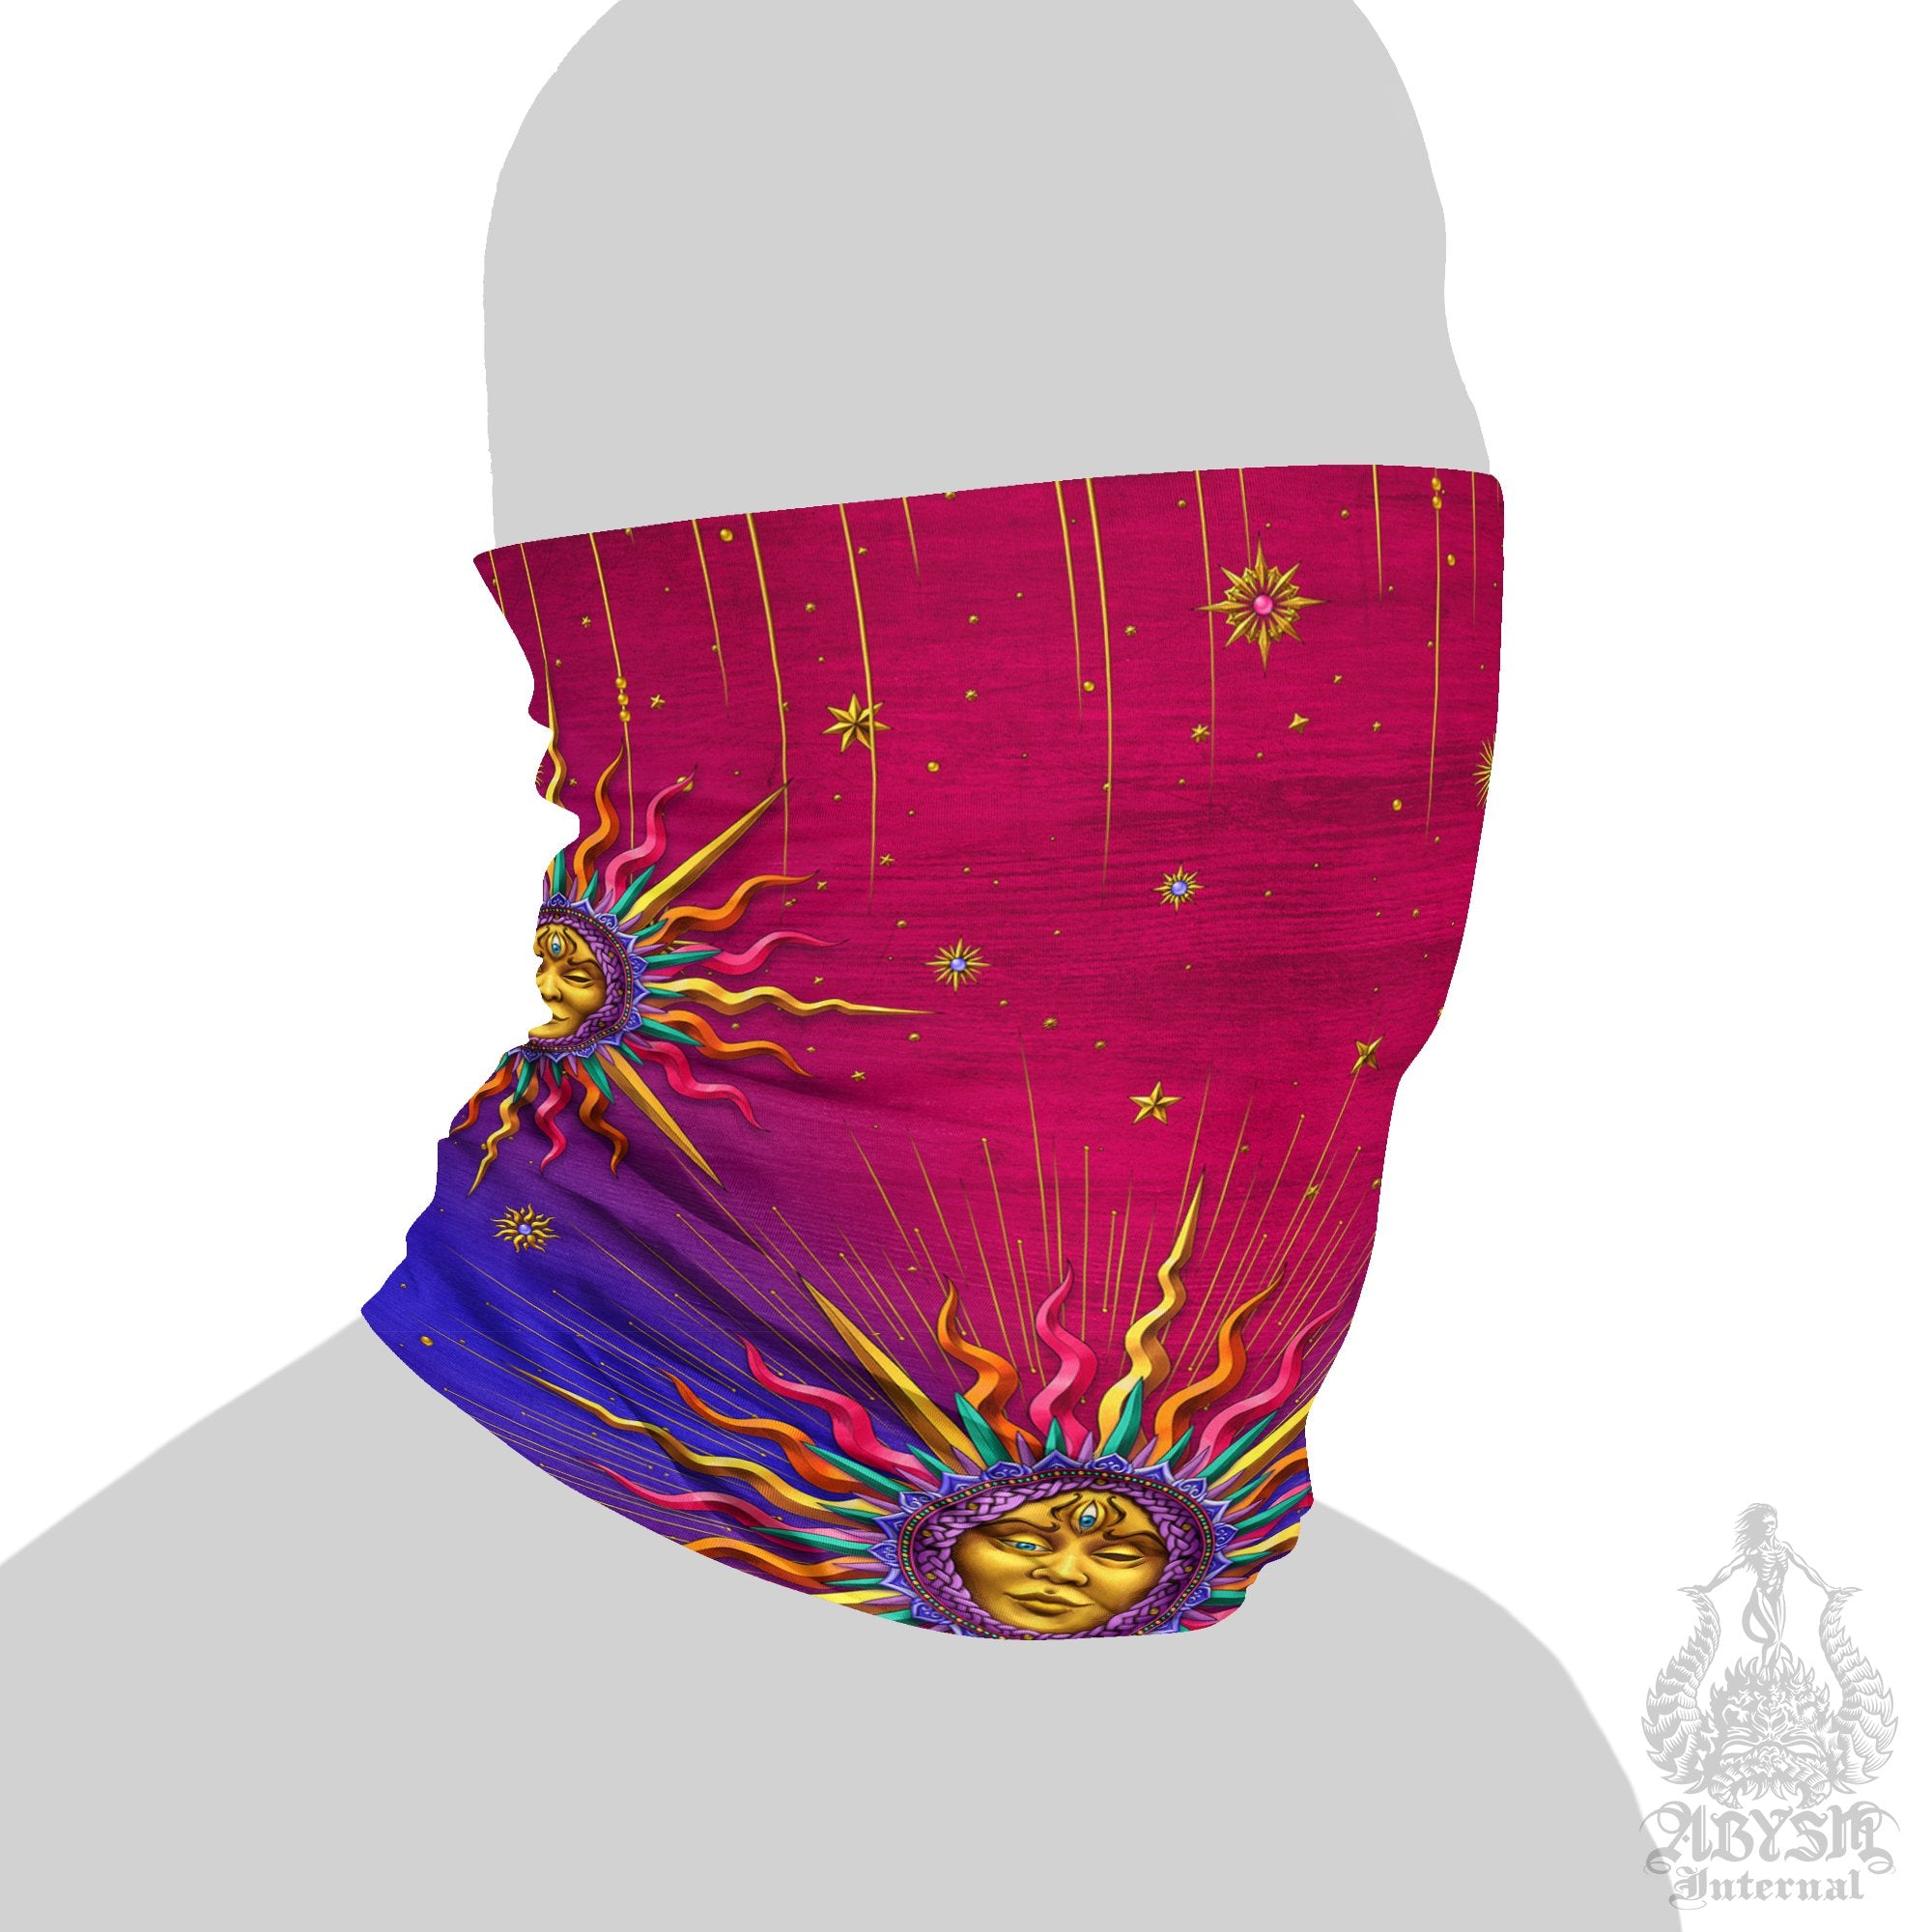 Psy Neck Gaiter, Colorful Tarot Arcana Sun Face Mask, Boho Printed Head Covering, Indie Outfit - Abysm Internal